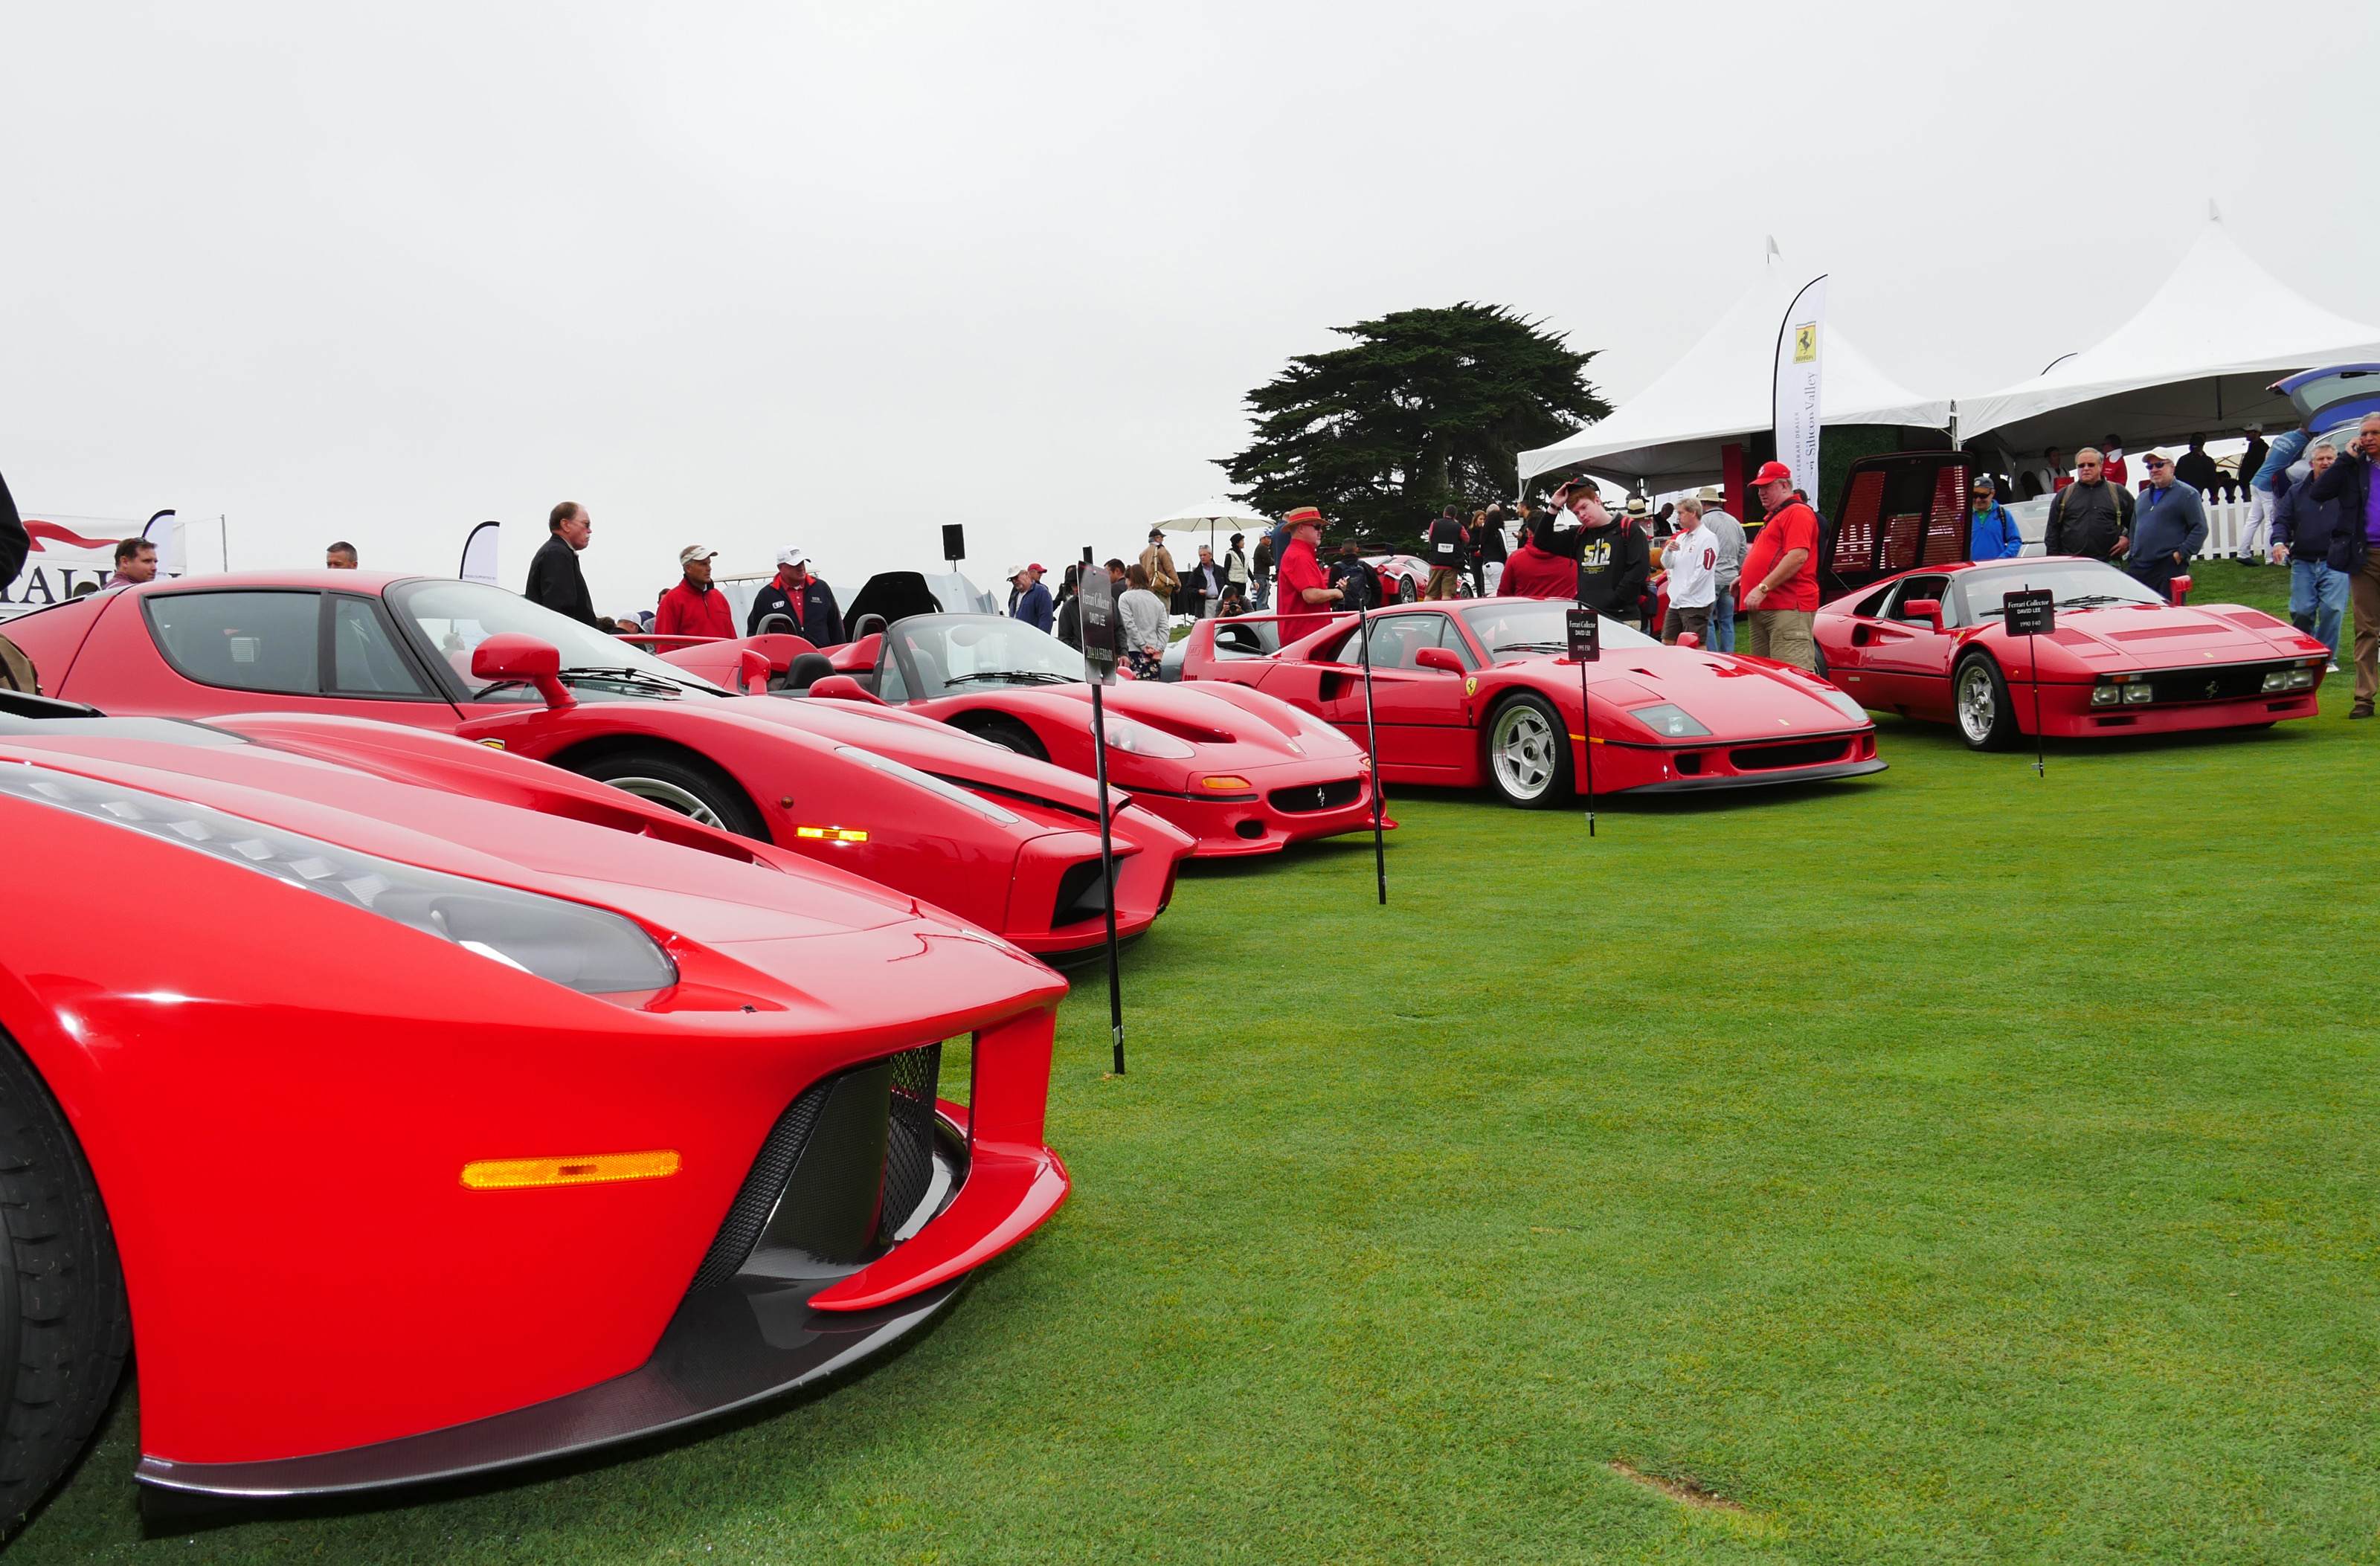 Concorso, Monterey’s biggest show celebrates not just cars but all things Italian, ClassicCars.com Journal